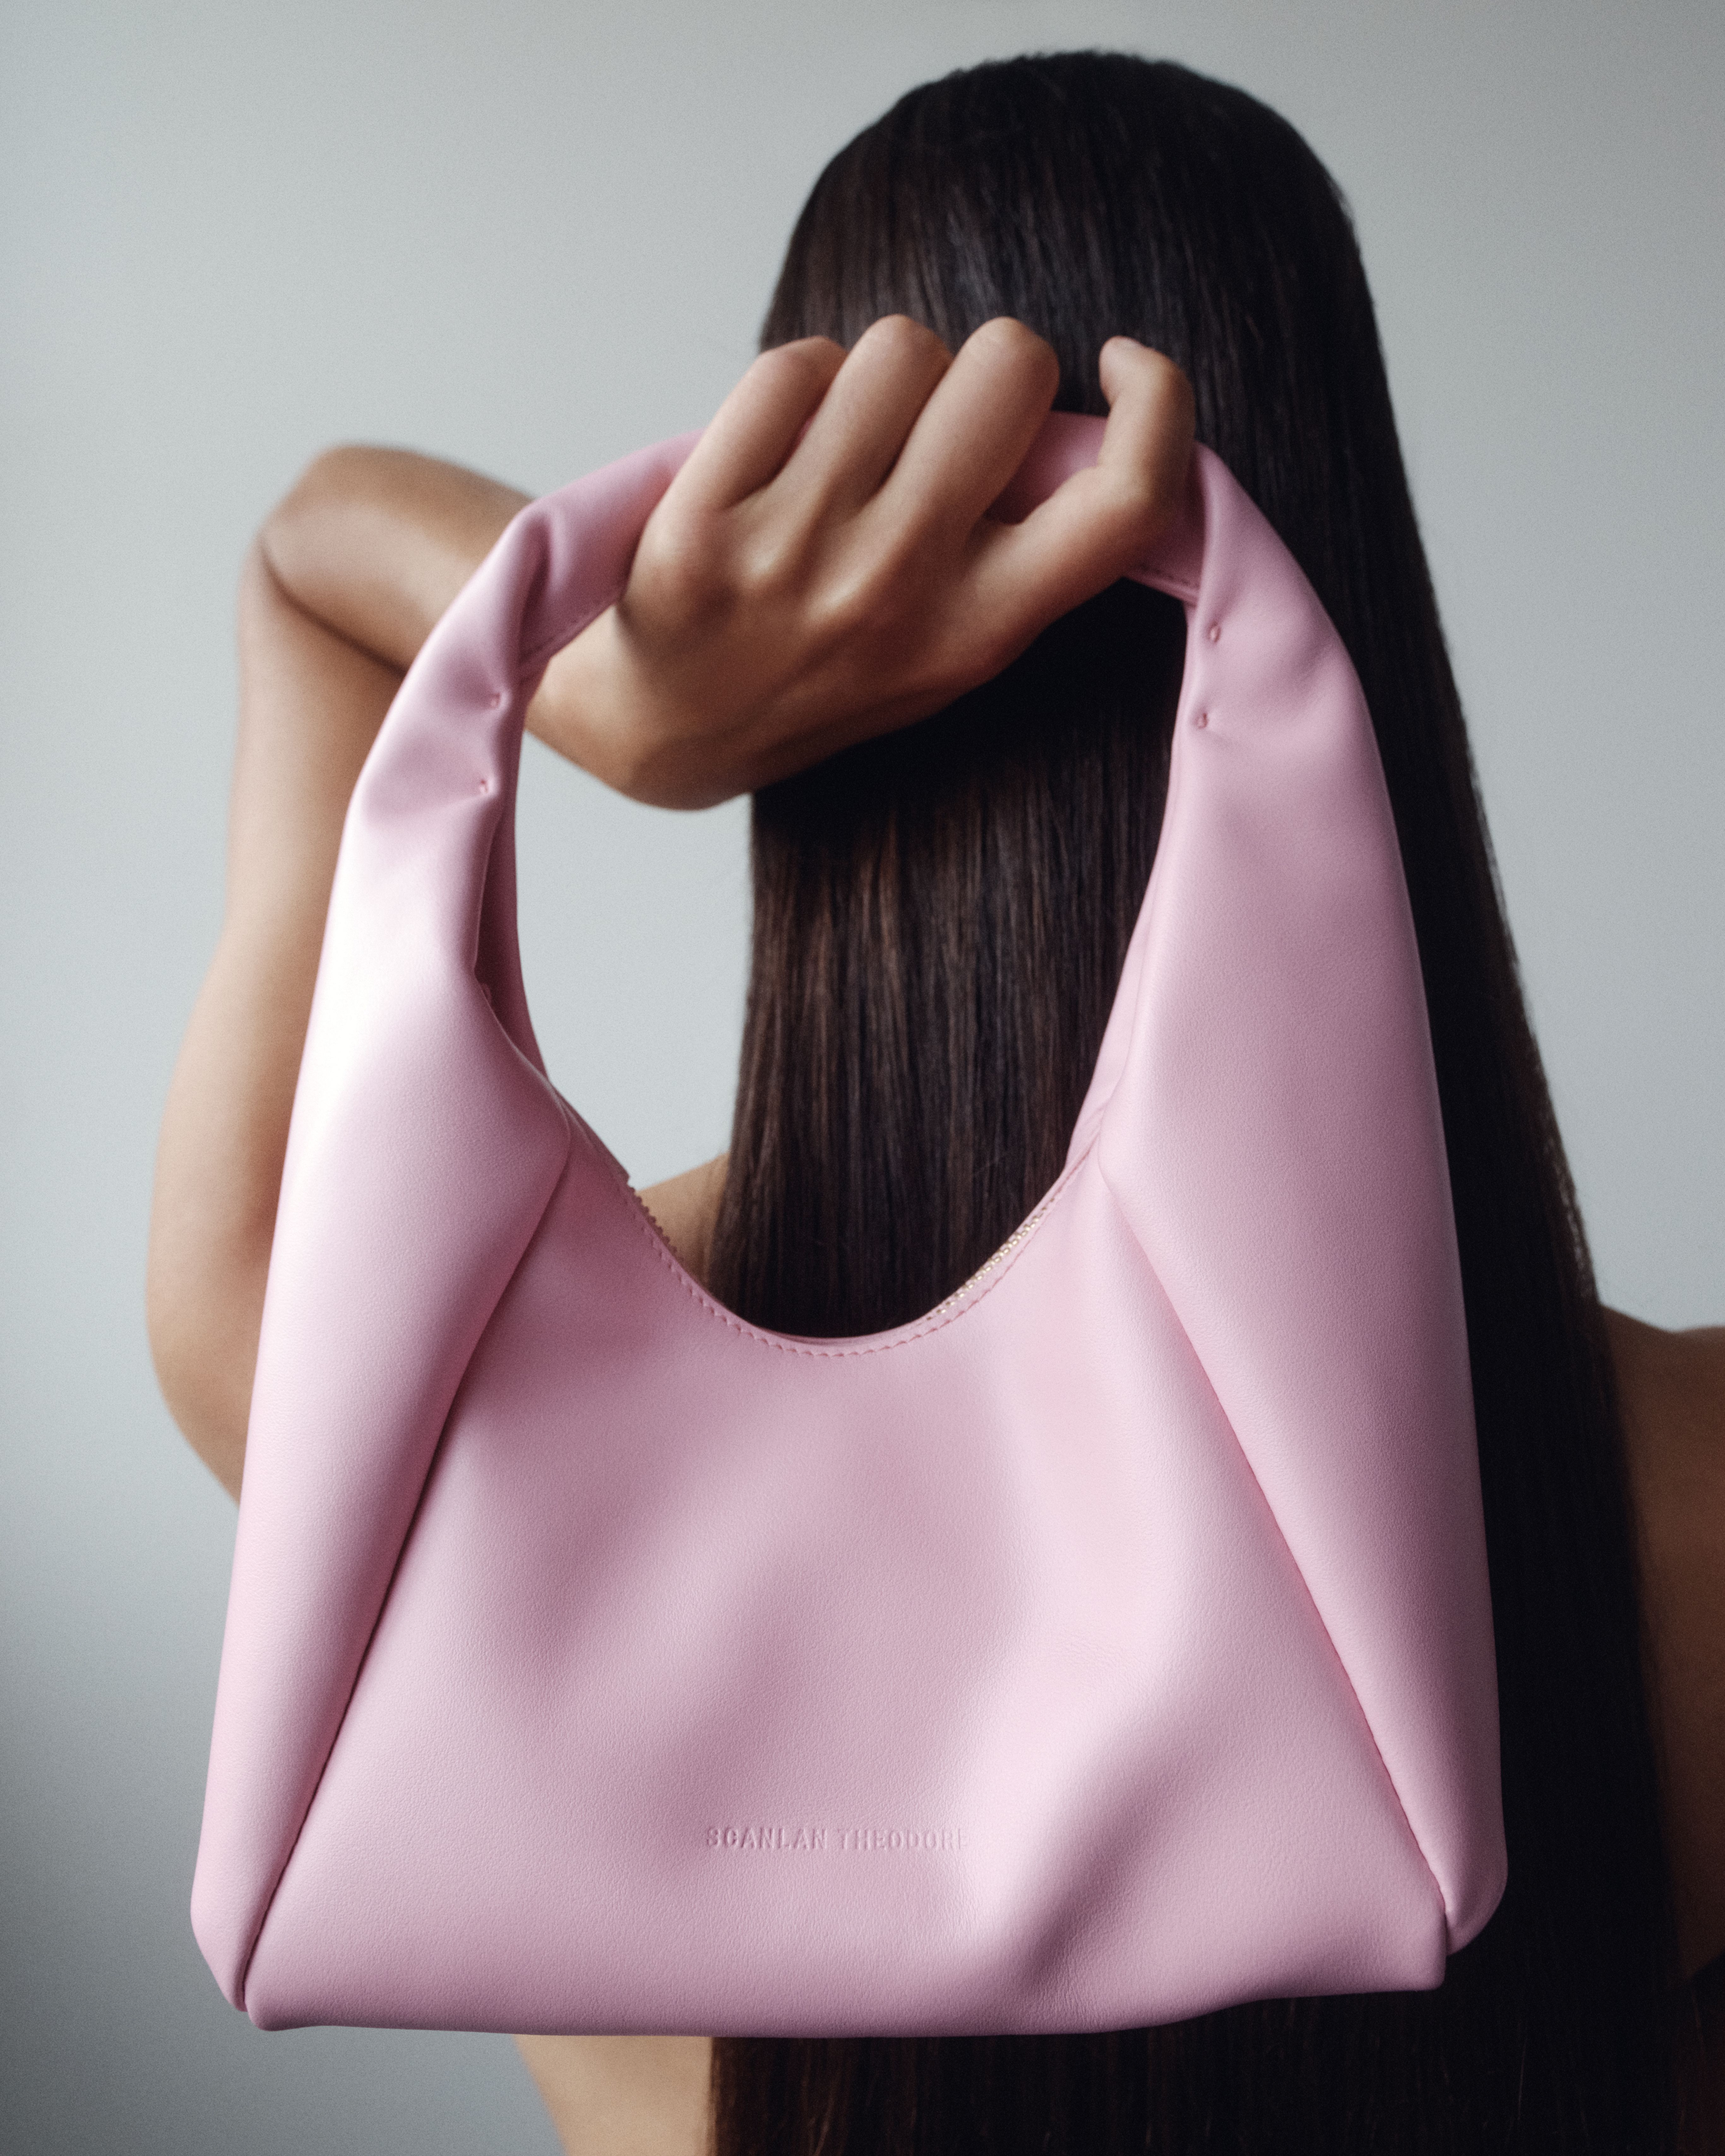 Model facing the wall with long straight brown hair holding a light pink leather bag behind her head